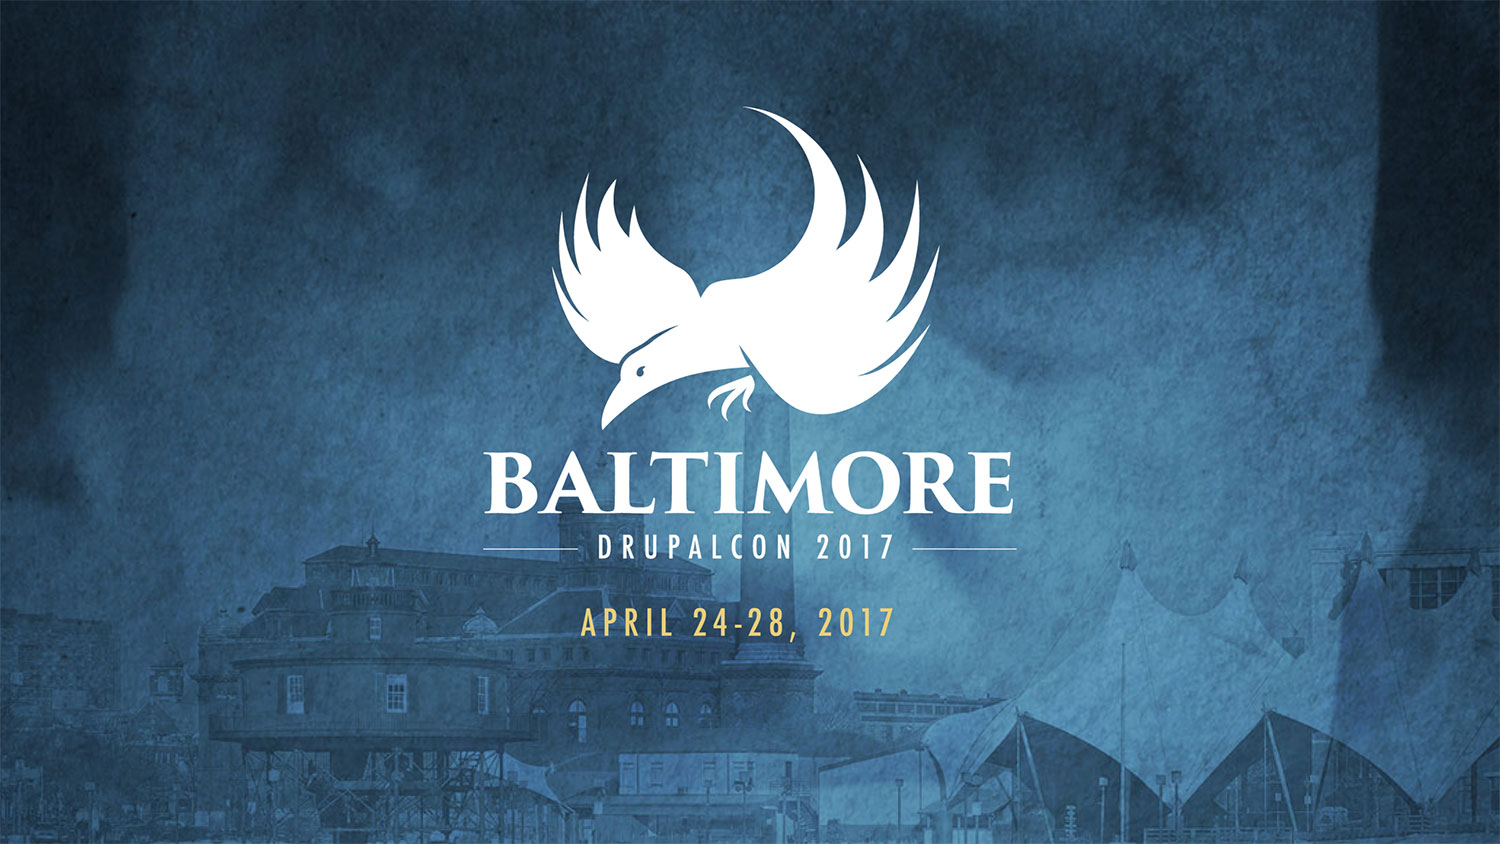 DrupalCon Baltimore logo with raven and Drupal droplet